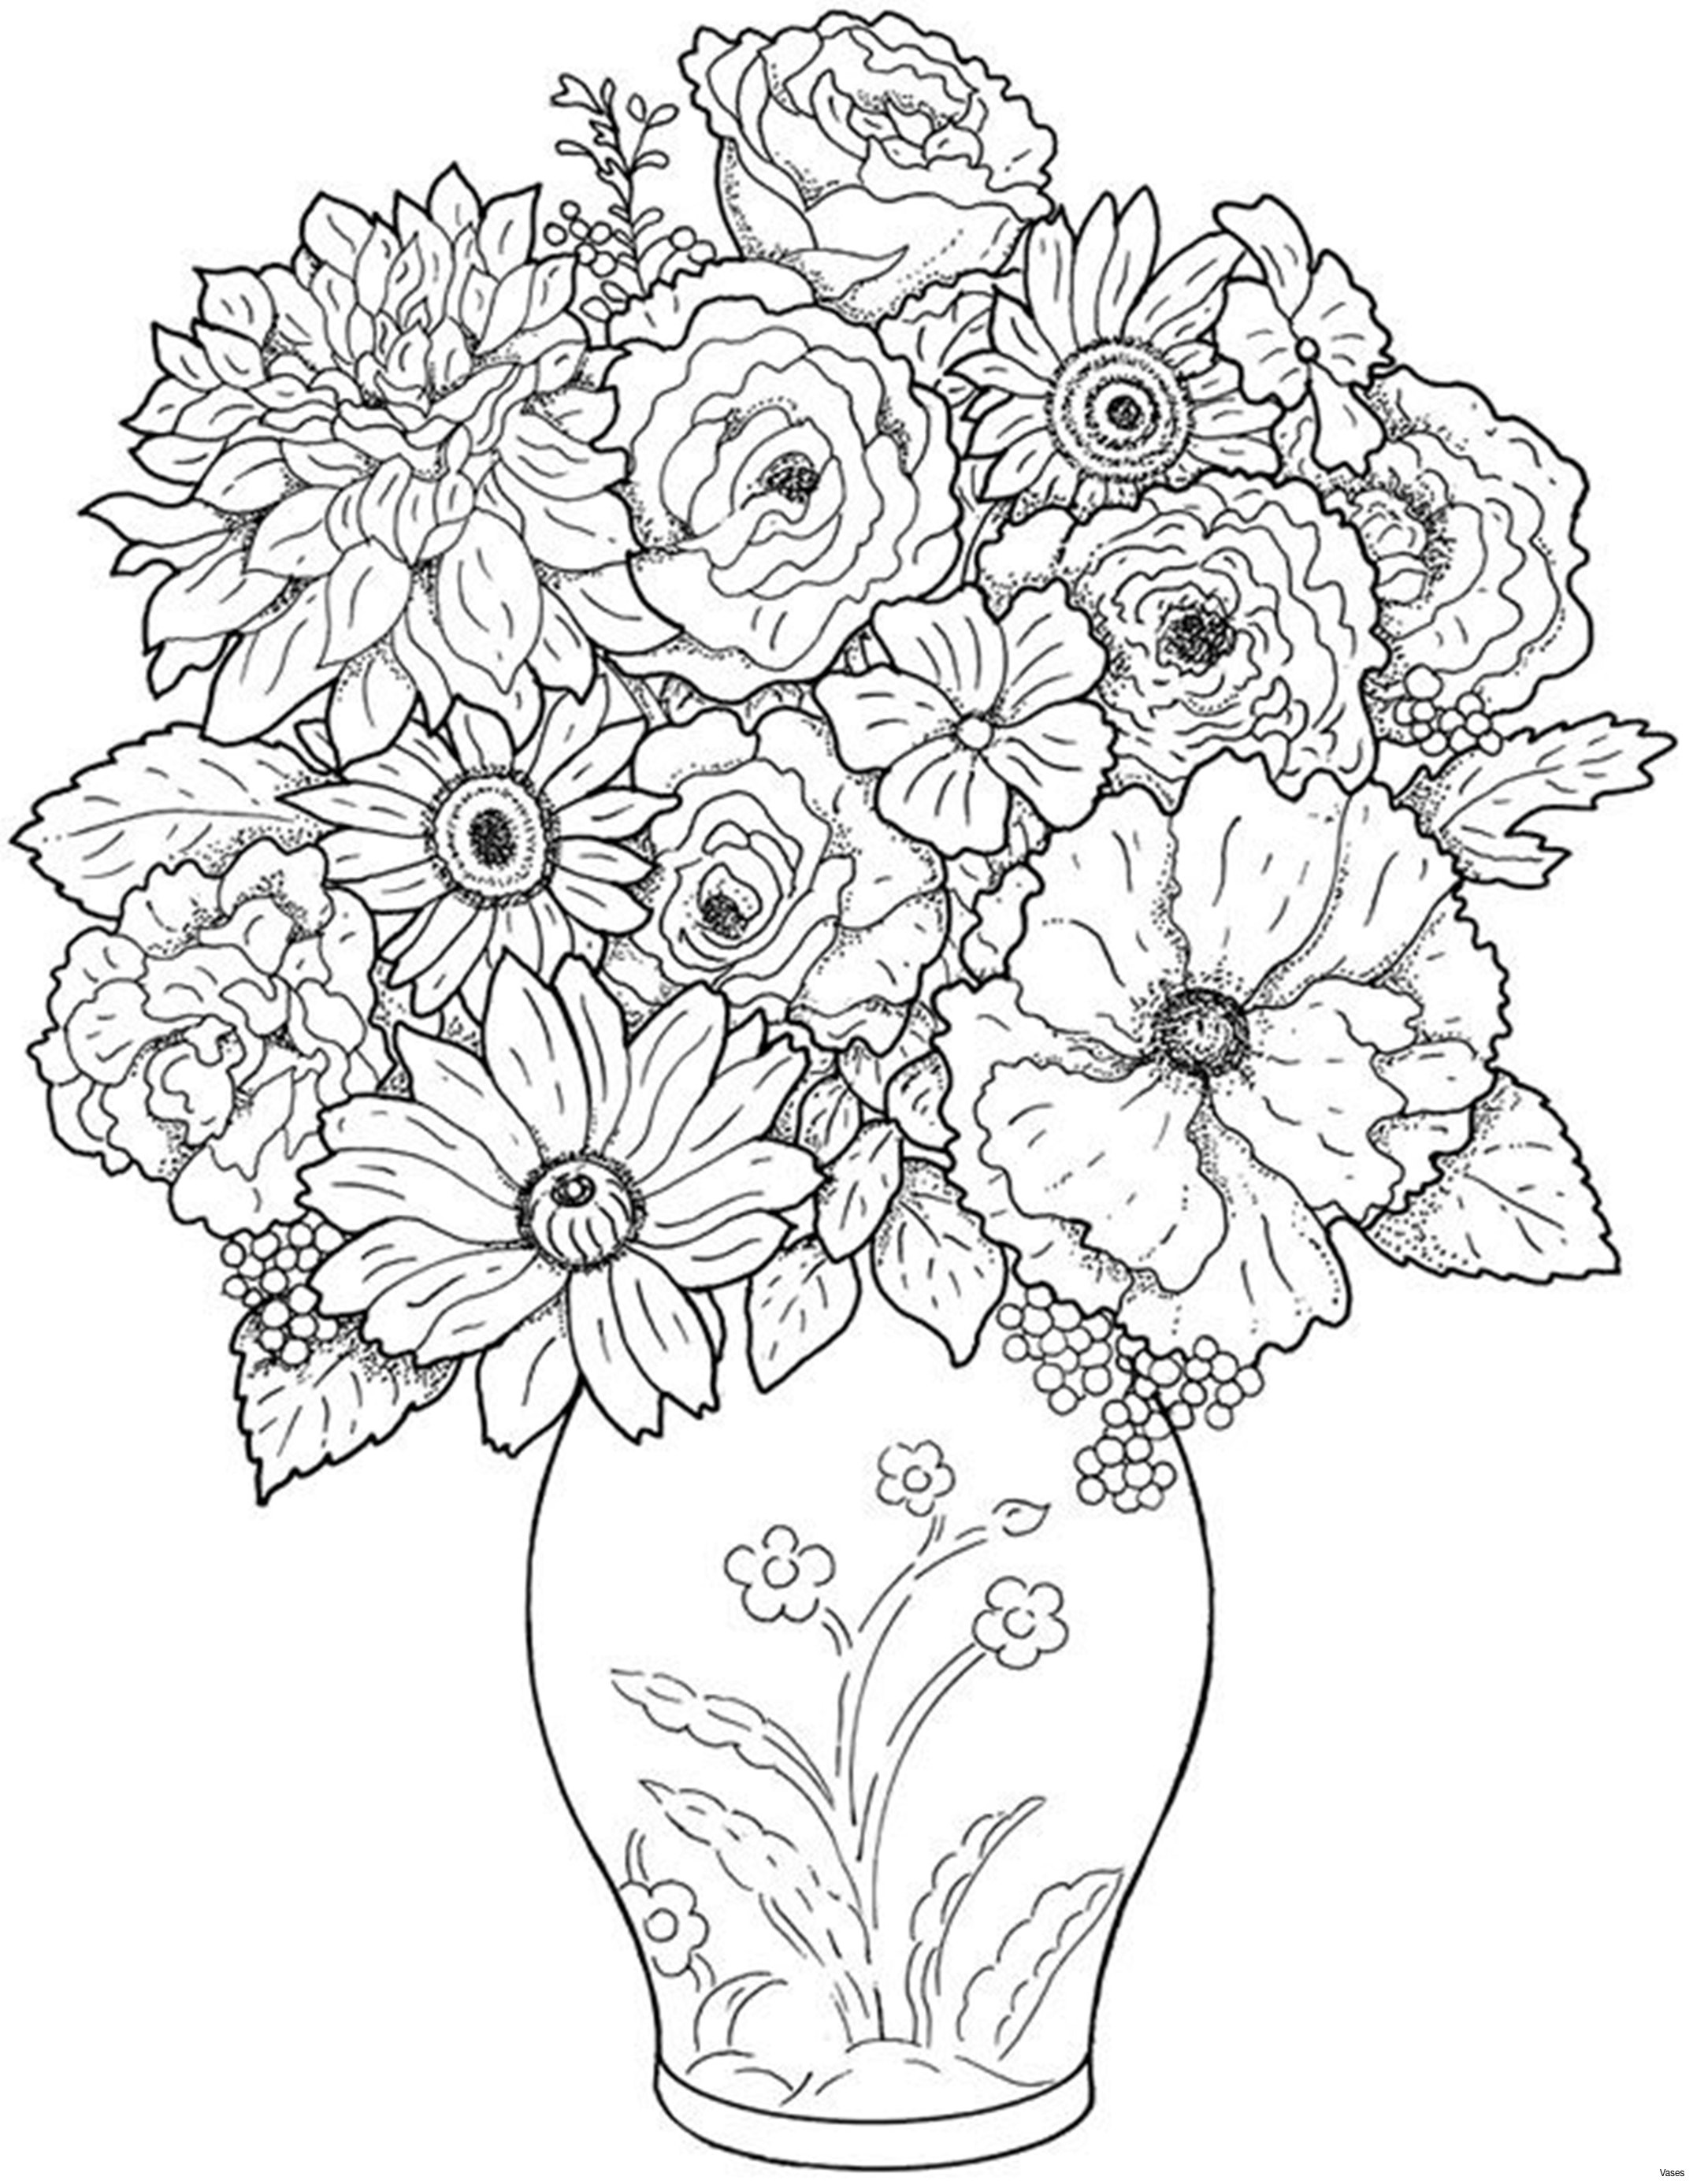 18 Cute Dried Flowers In Vase 2024 free download dried flowers in vase of cool vases flower vase coloring page pages flowers in a top i 0d regarding cool vases flower vase coloring page pages flowers in a top i 0d of cool vases